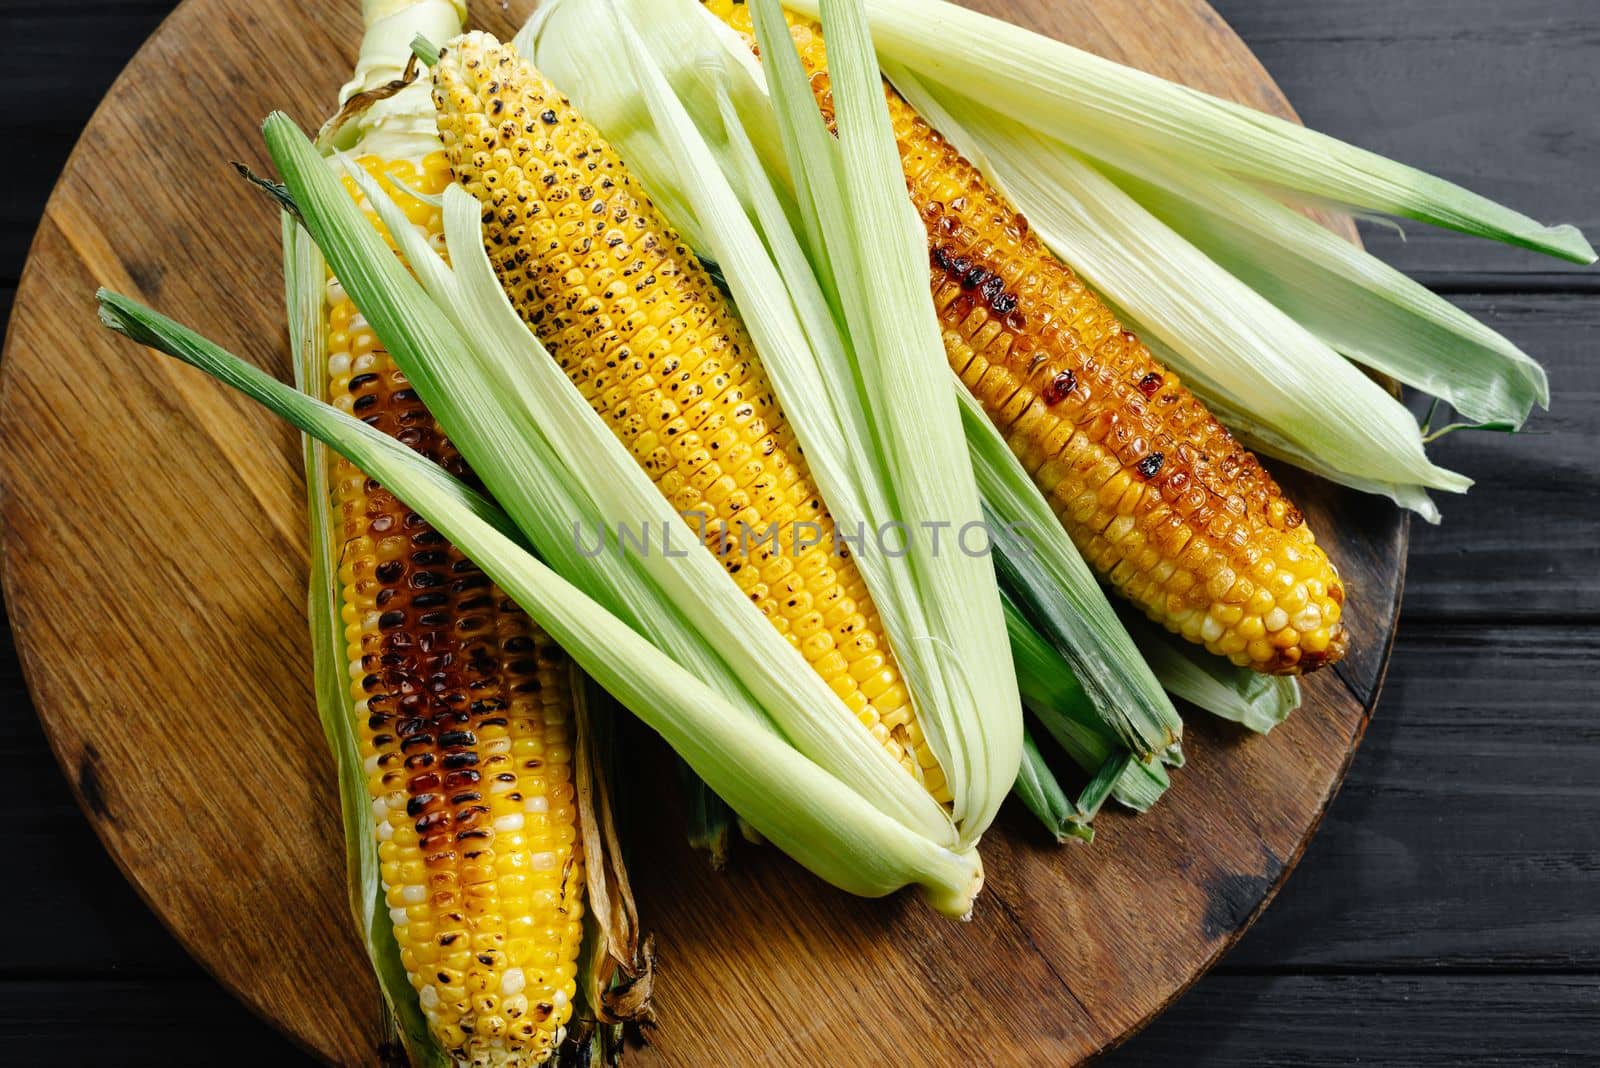 A cauldron of corn roasted over charcoal on a wooden board. Whole corn cobs.